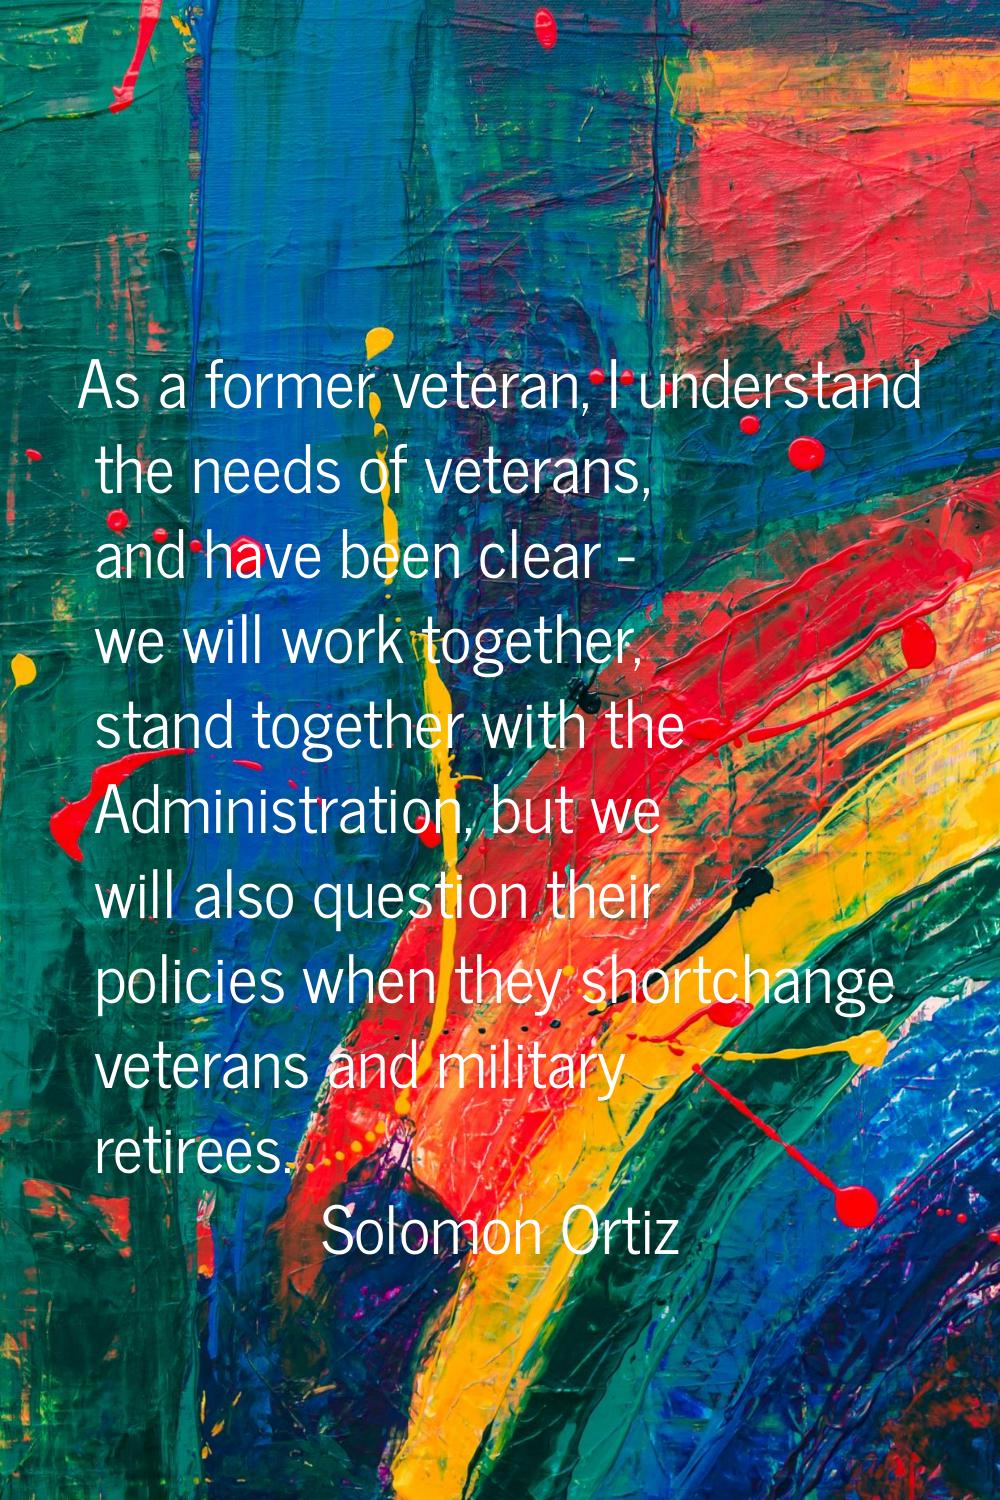 As a former veteran, I understand the needs of veterans, and have been clear - we will work togethe